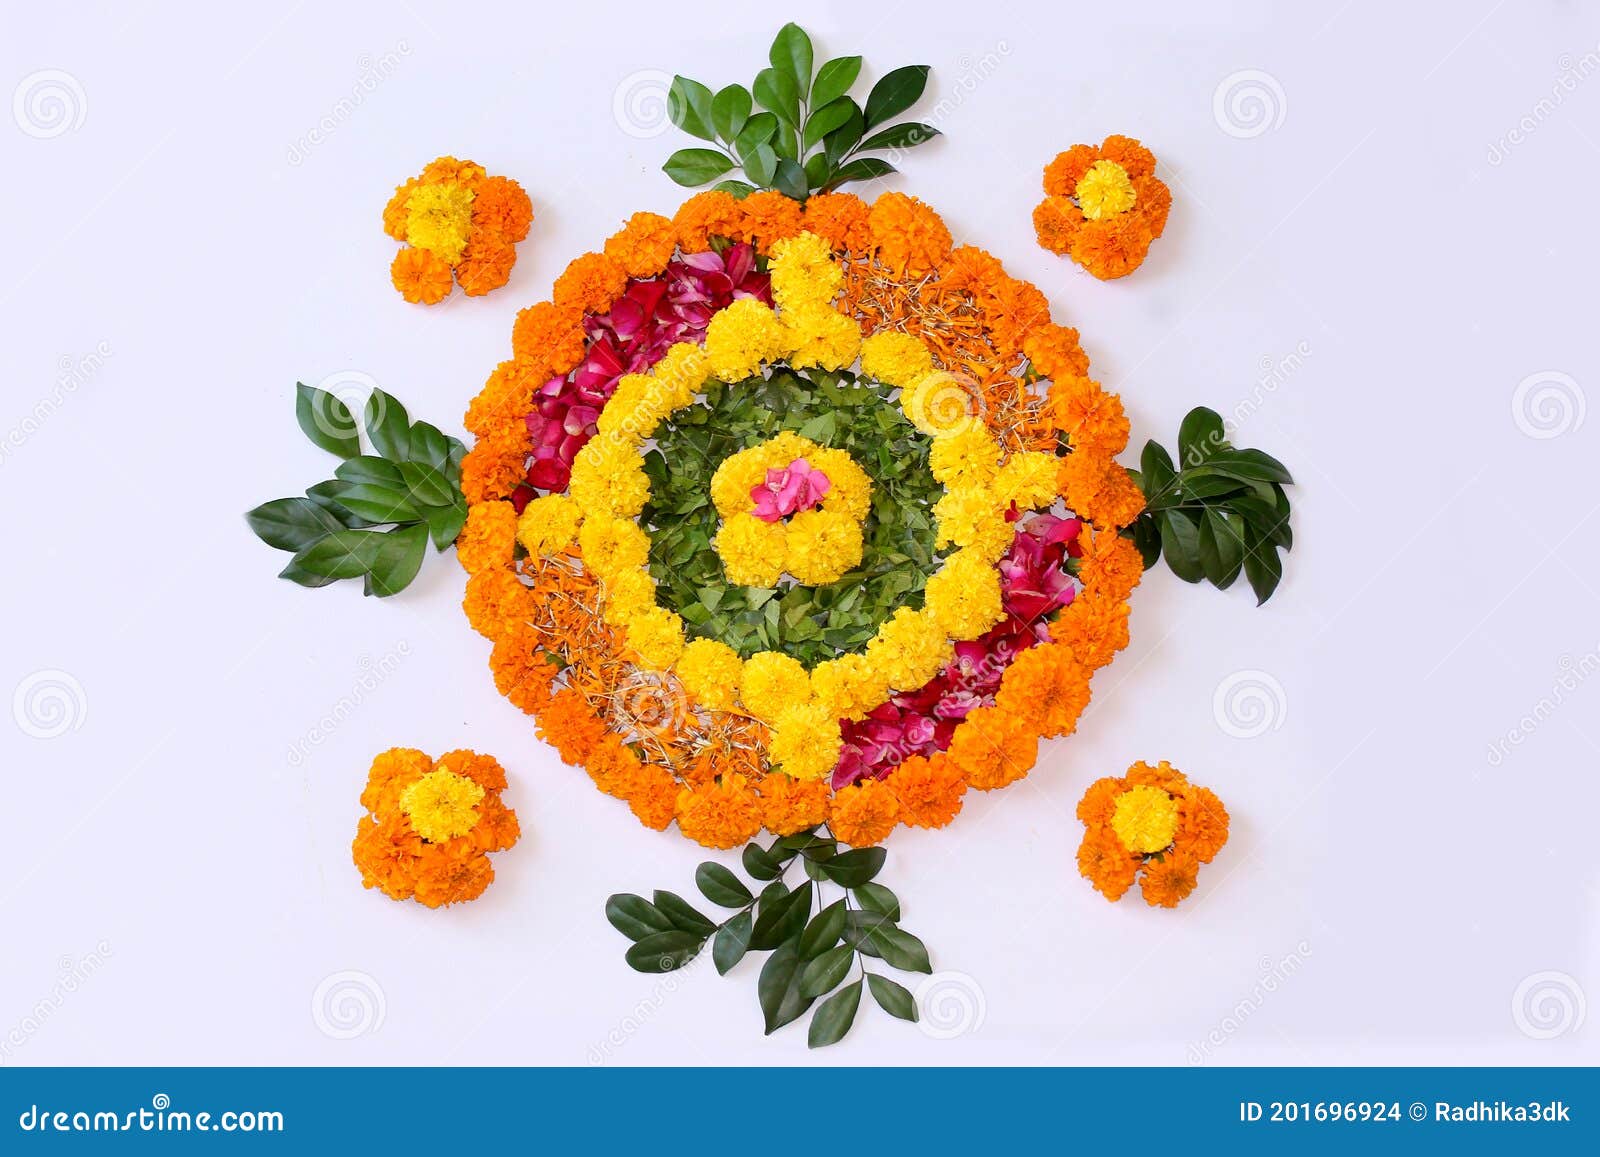 Flower Rangoli Designs Background Stock Photo - Image of cultural ...